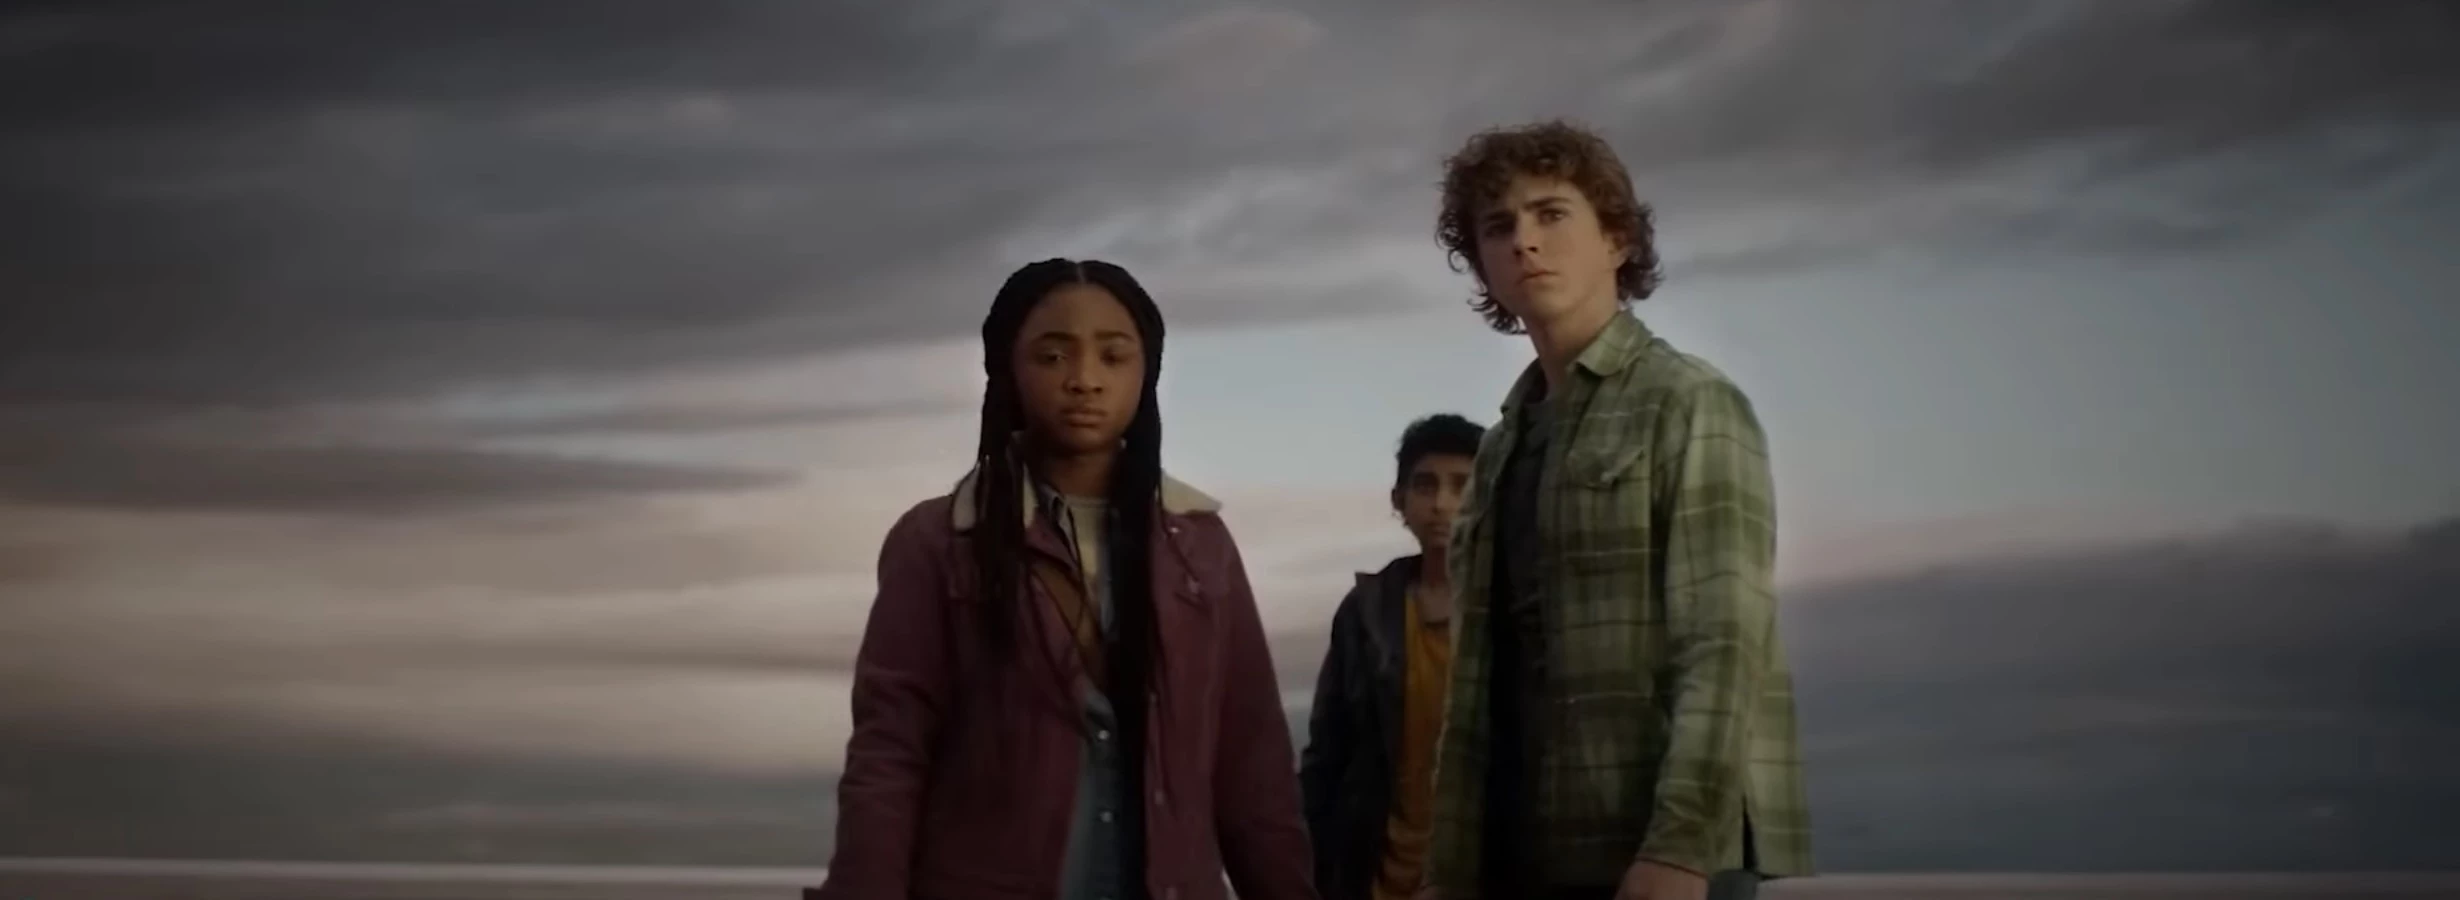 Percy Jackson and the Olympians Episode 5 Review